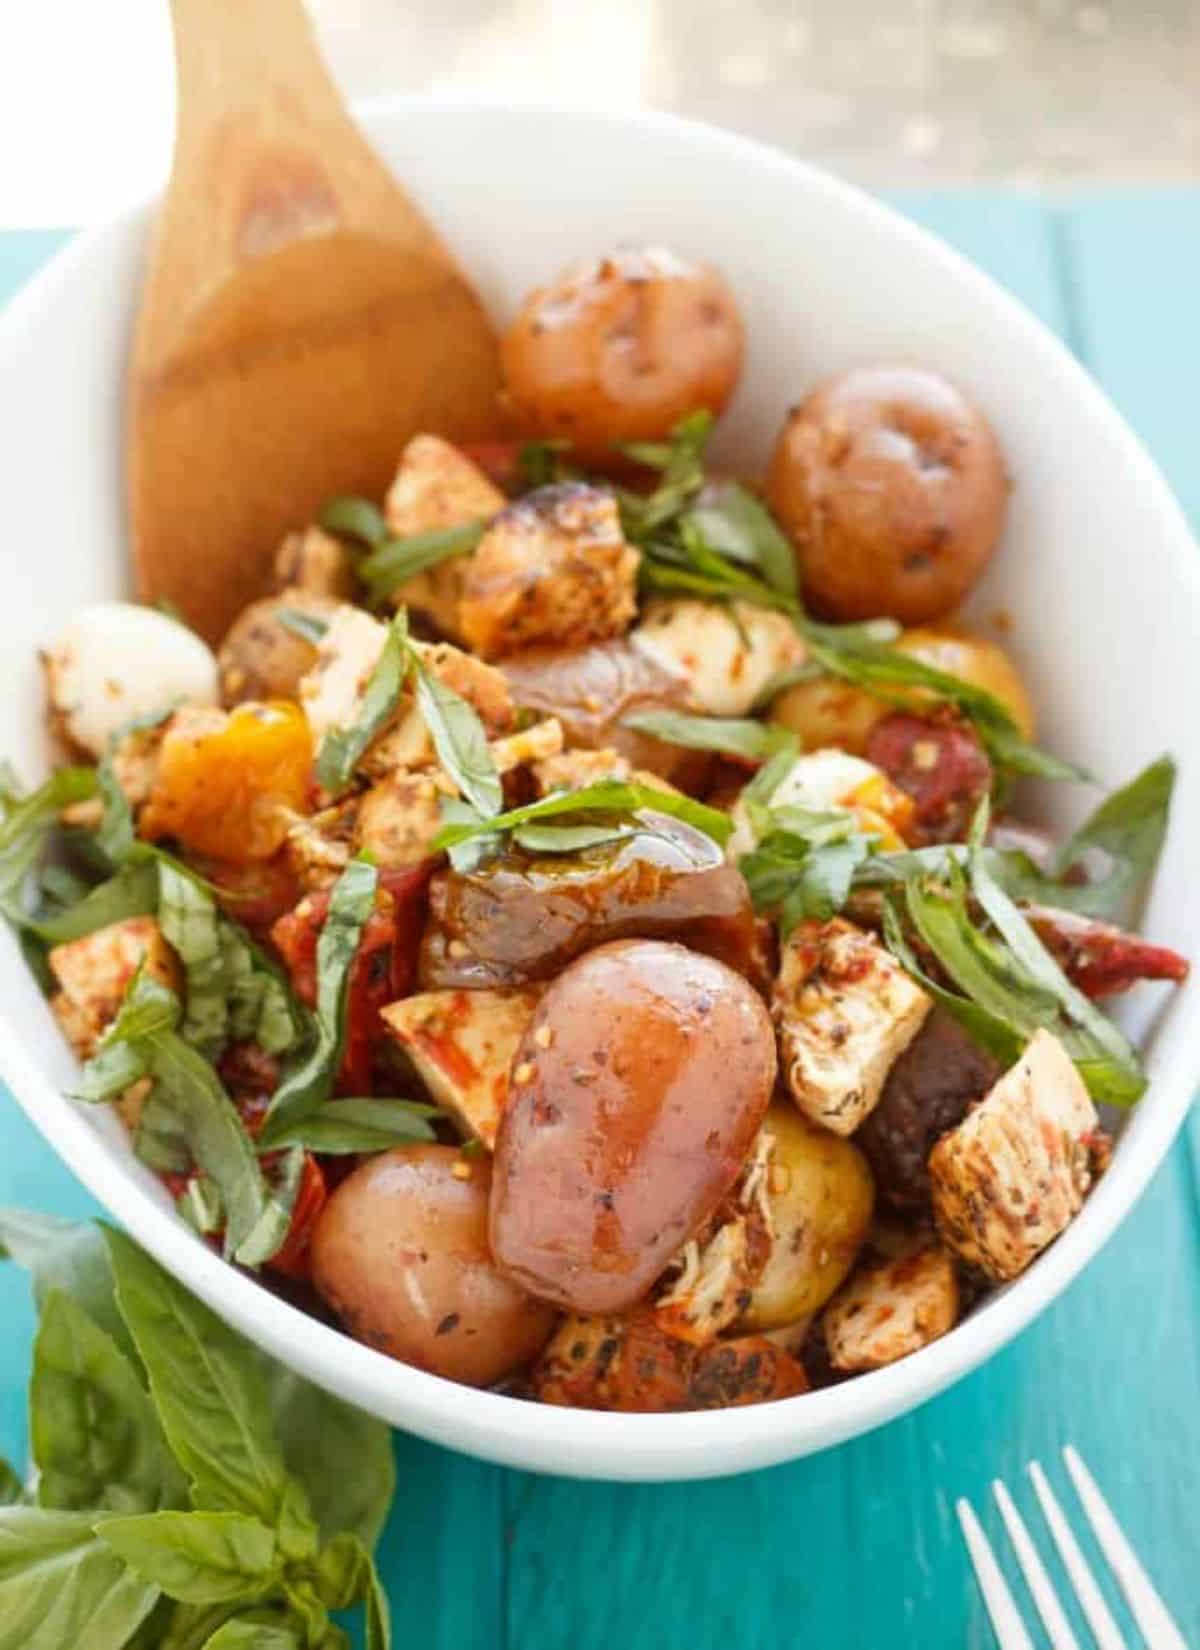 Flavorful Roasted Potato and Chicken Caprese Salad in a white bowl with a wooden spatula.